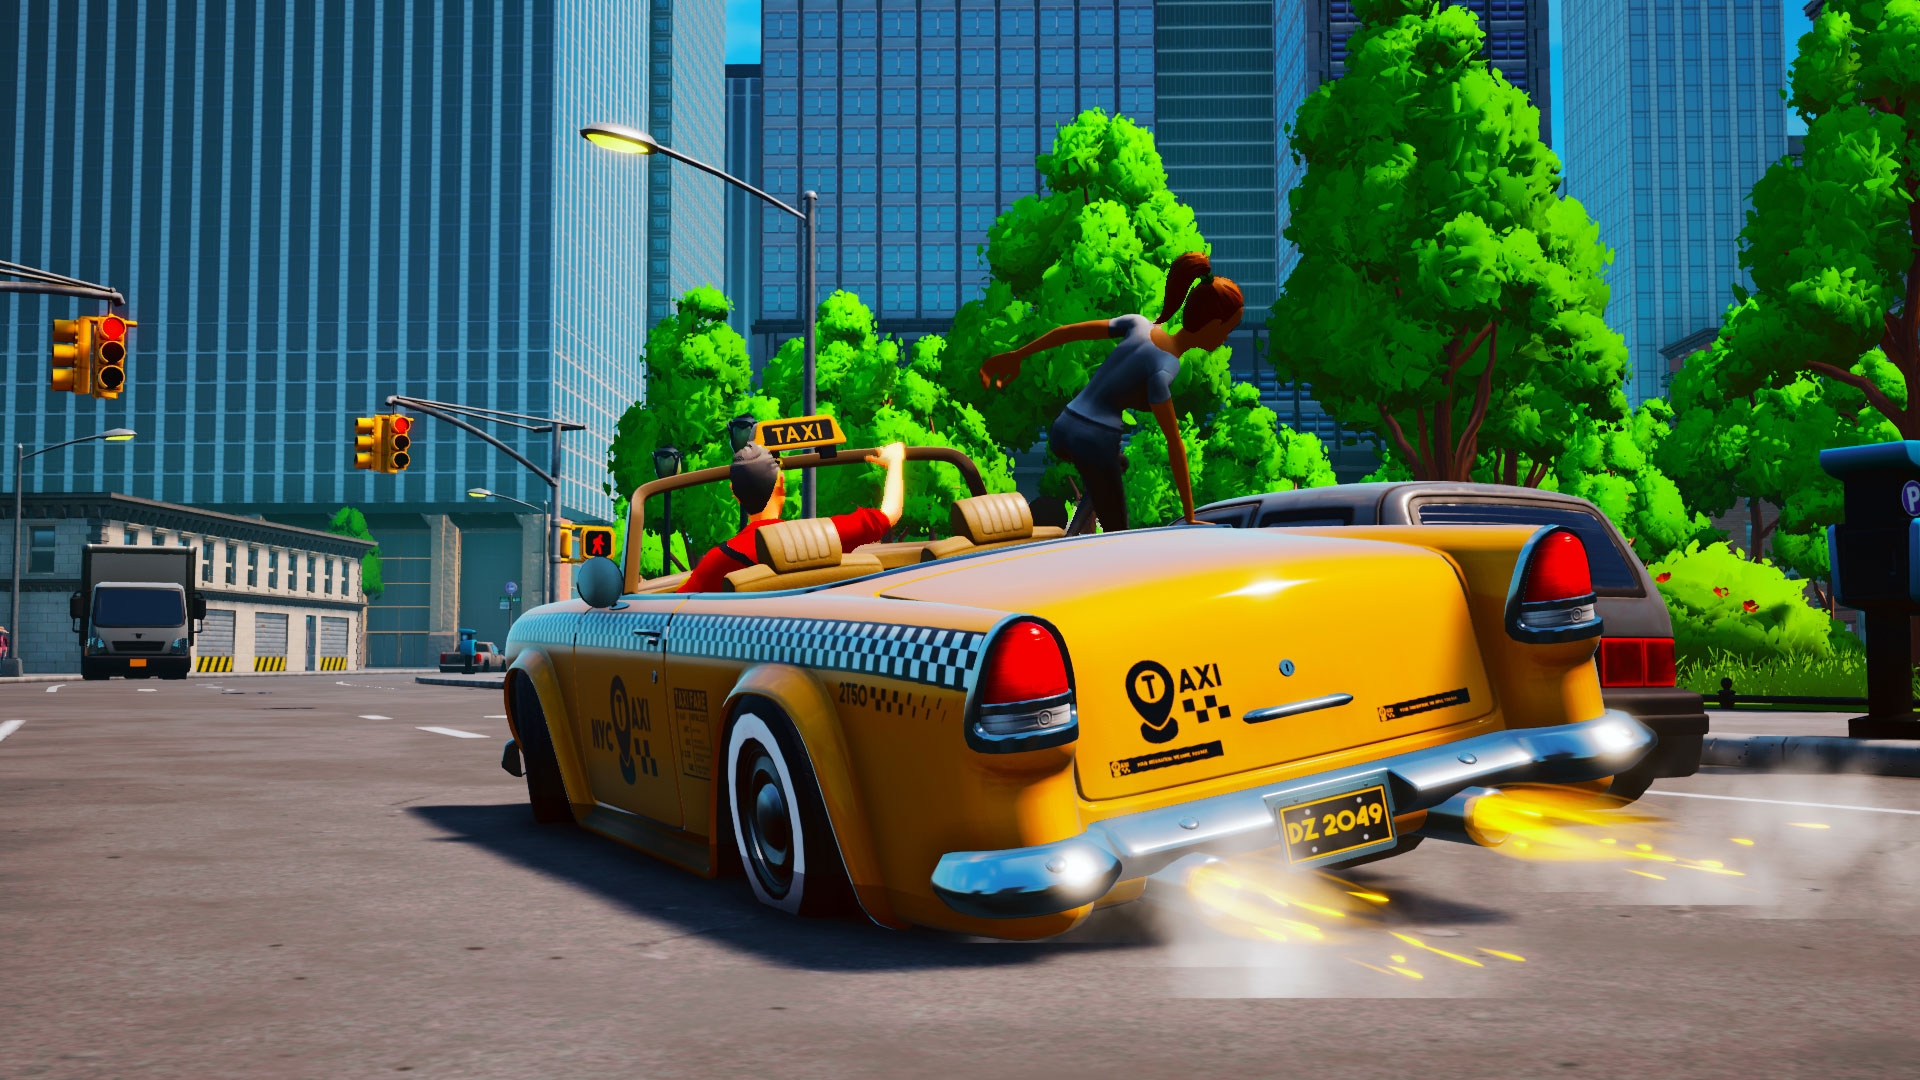 Crazy Driving Taxi Chaos console game launched on February 23